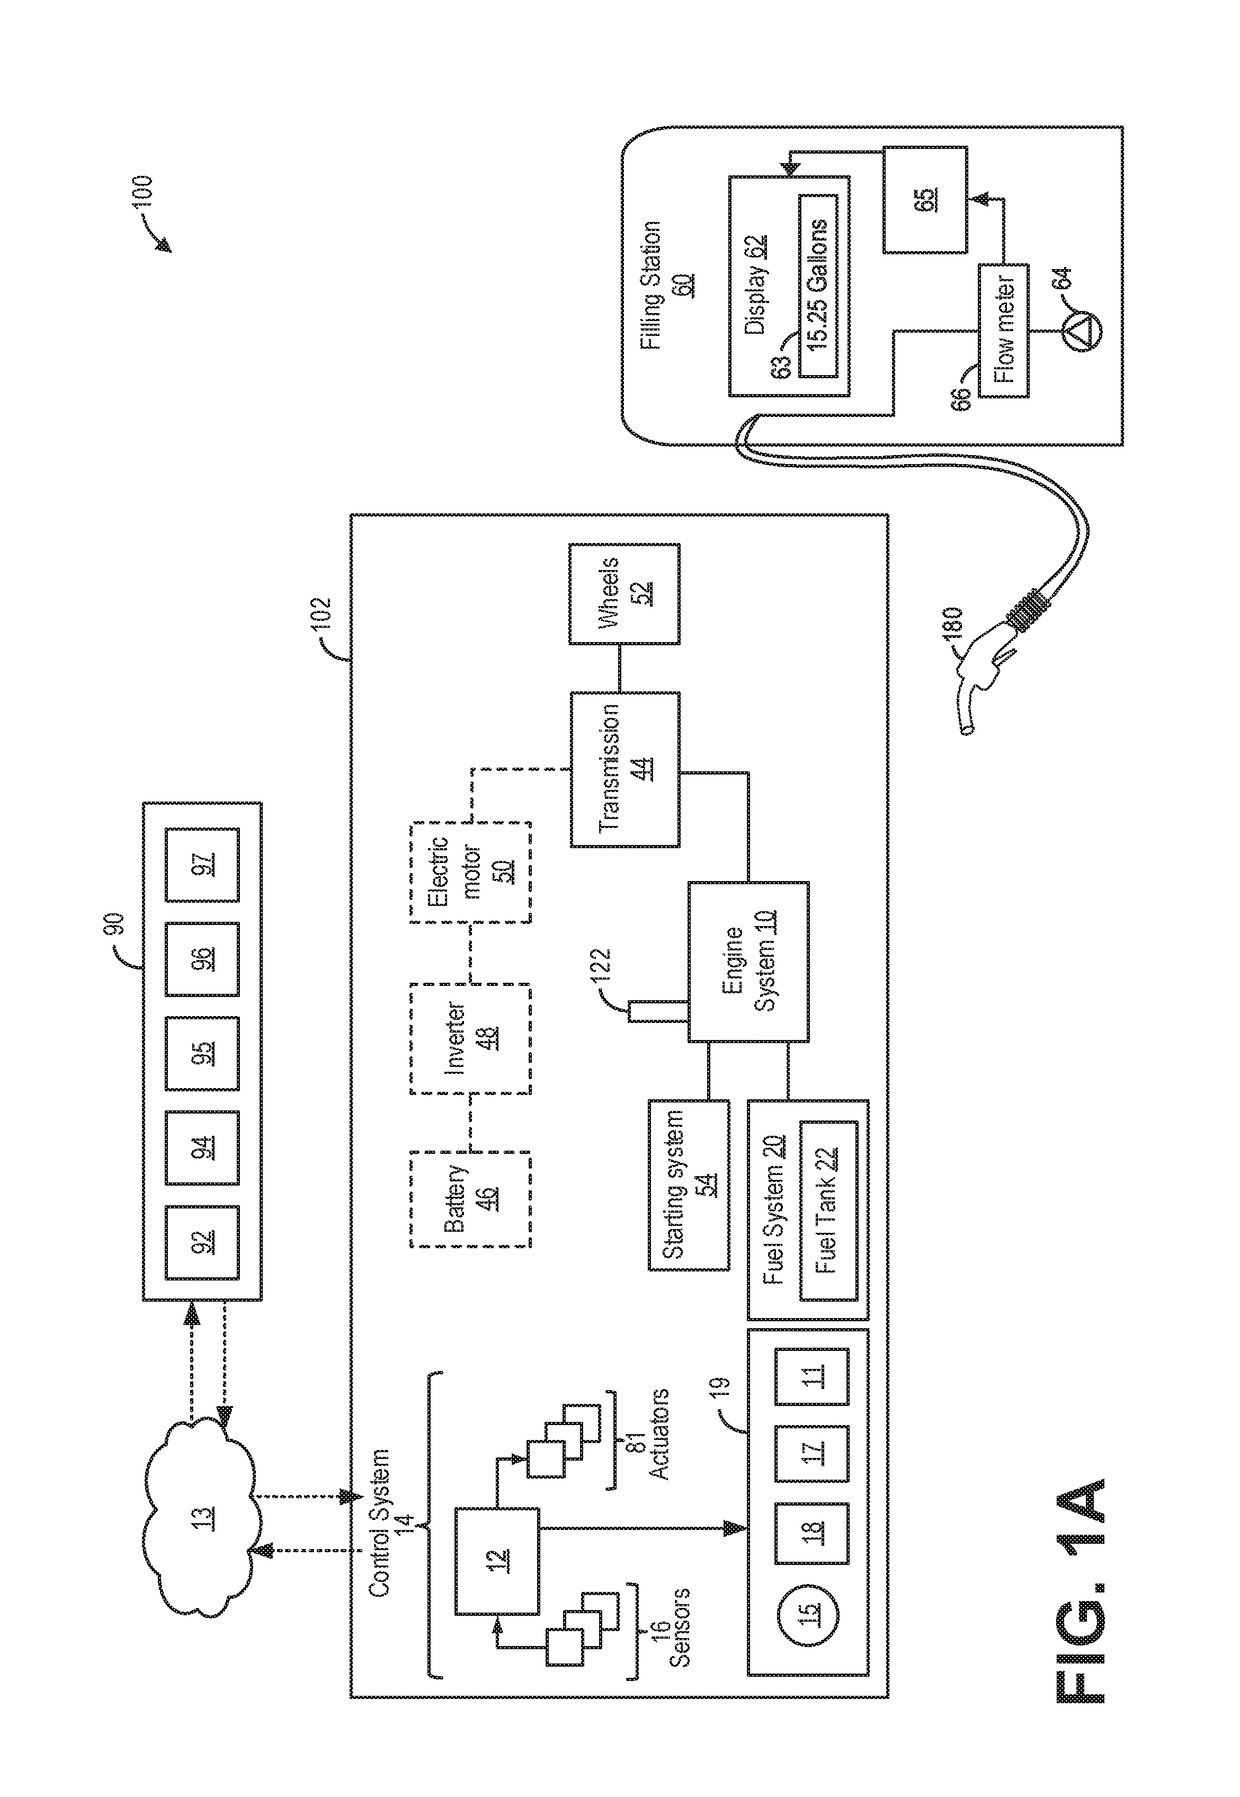 Systems and methods for fuel level estimation